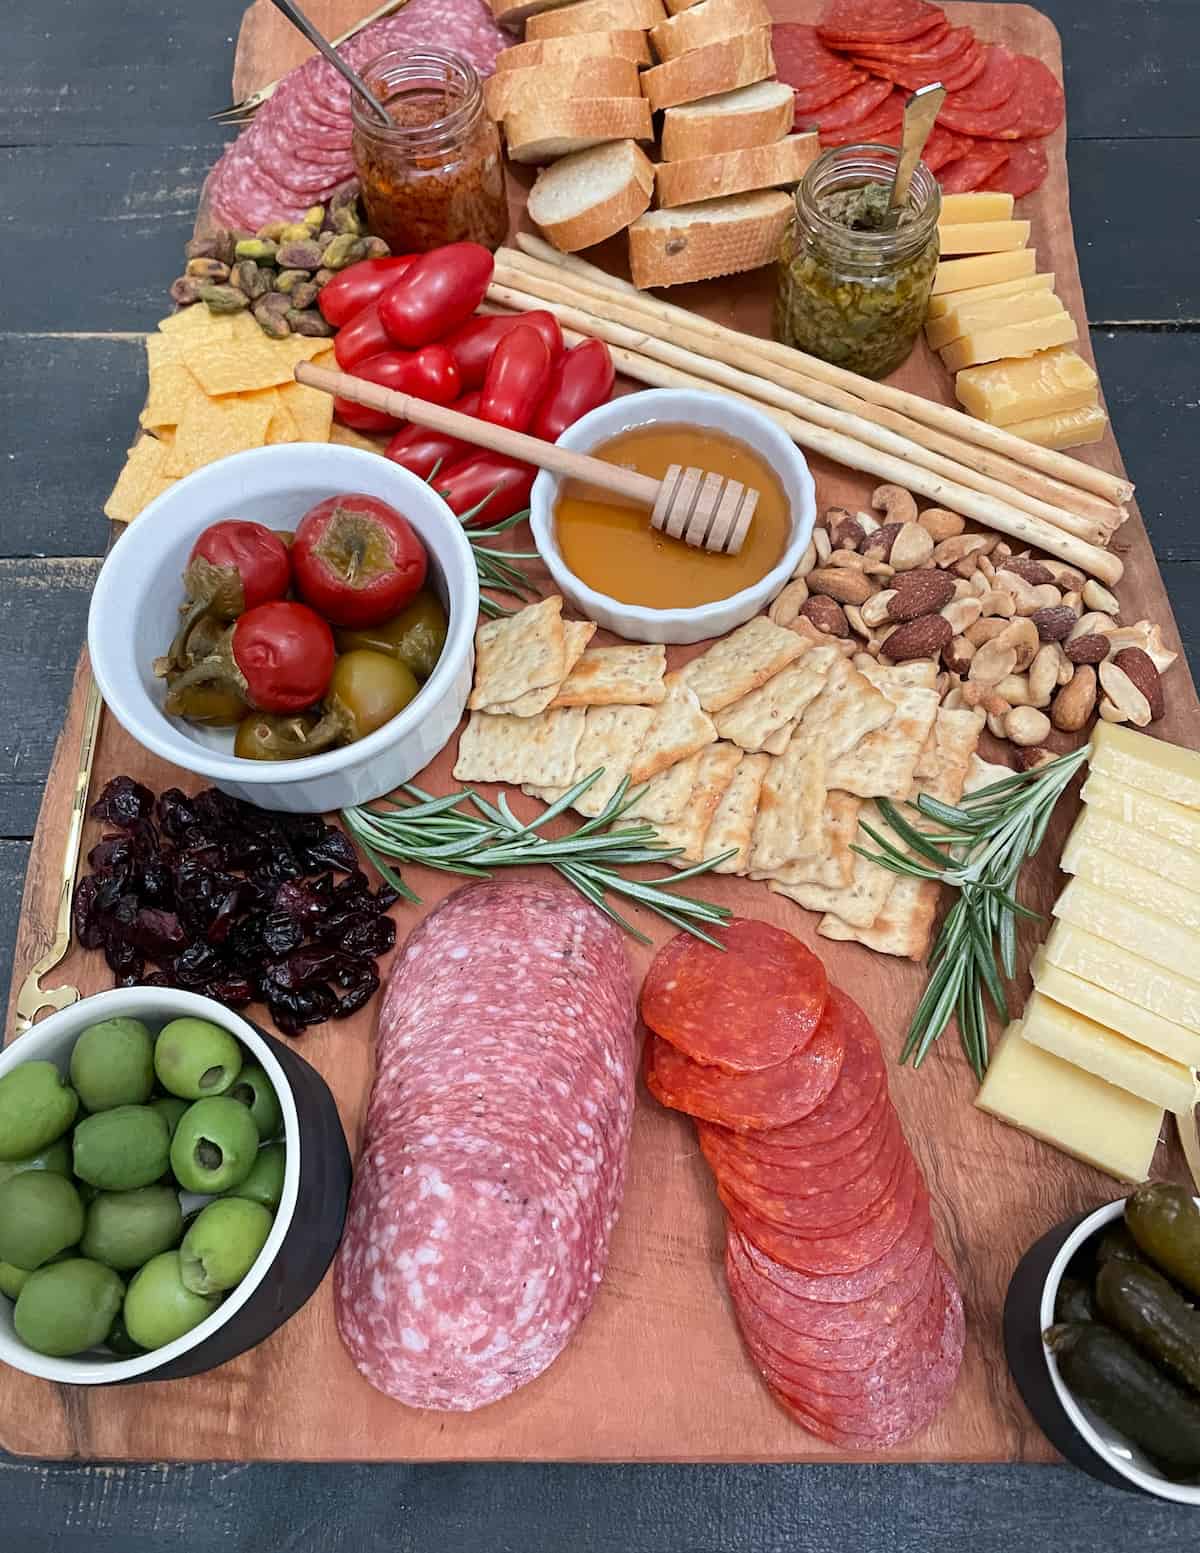 Charcuterie board with salame, pepperoni, cheeses, spreads, nuts, pickles, olives, and rosemary.